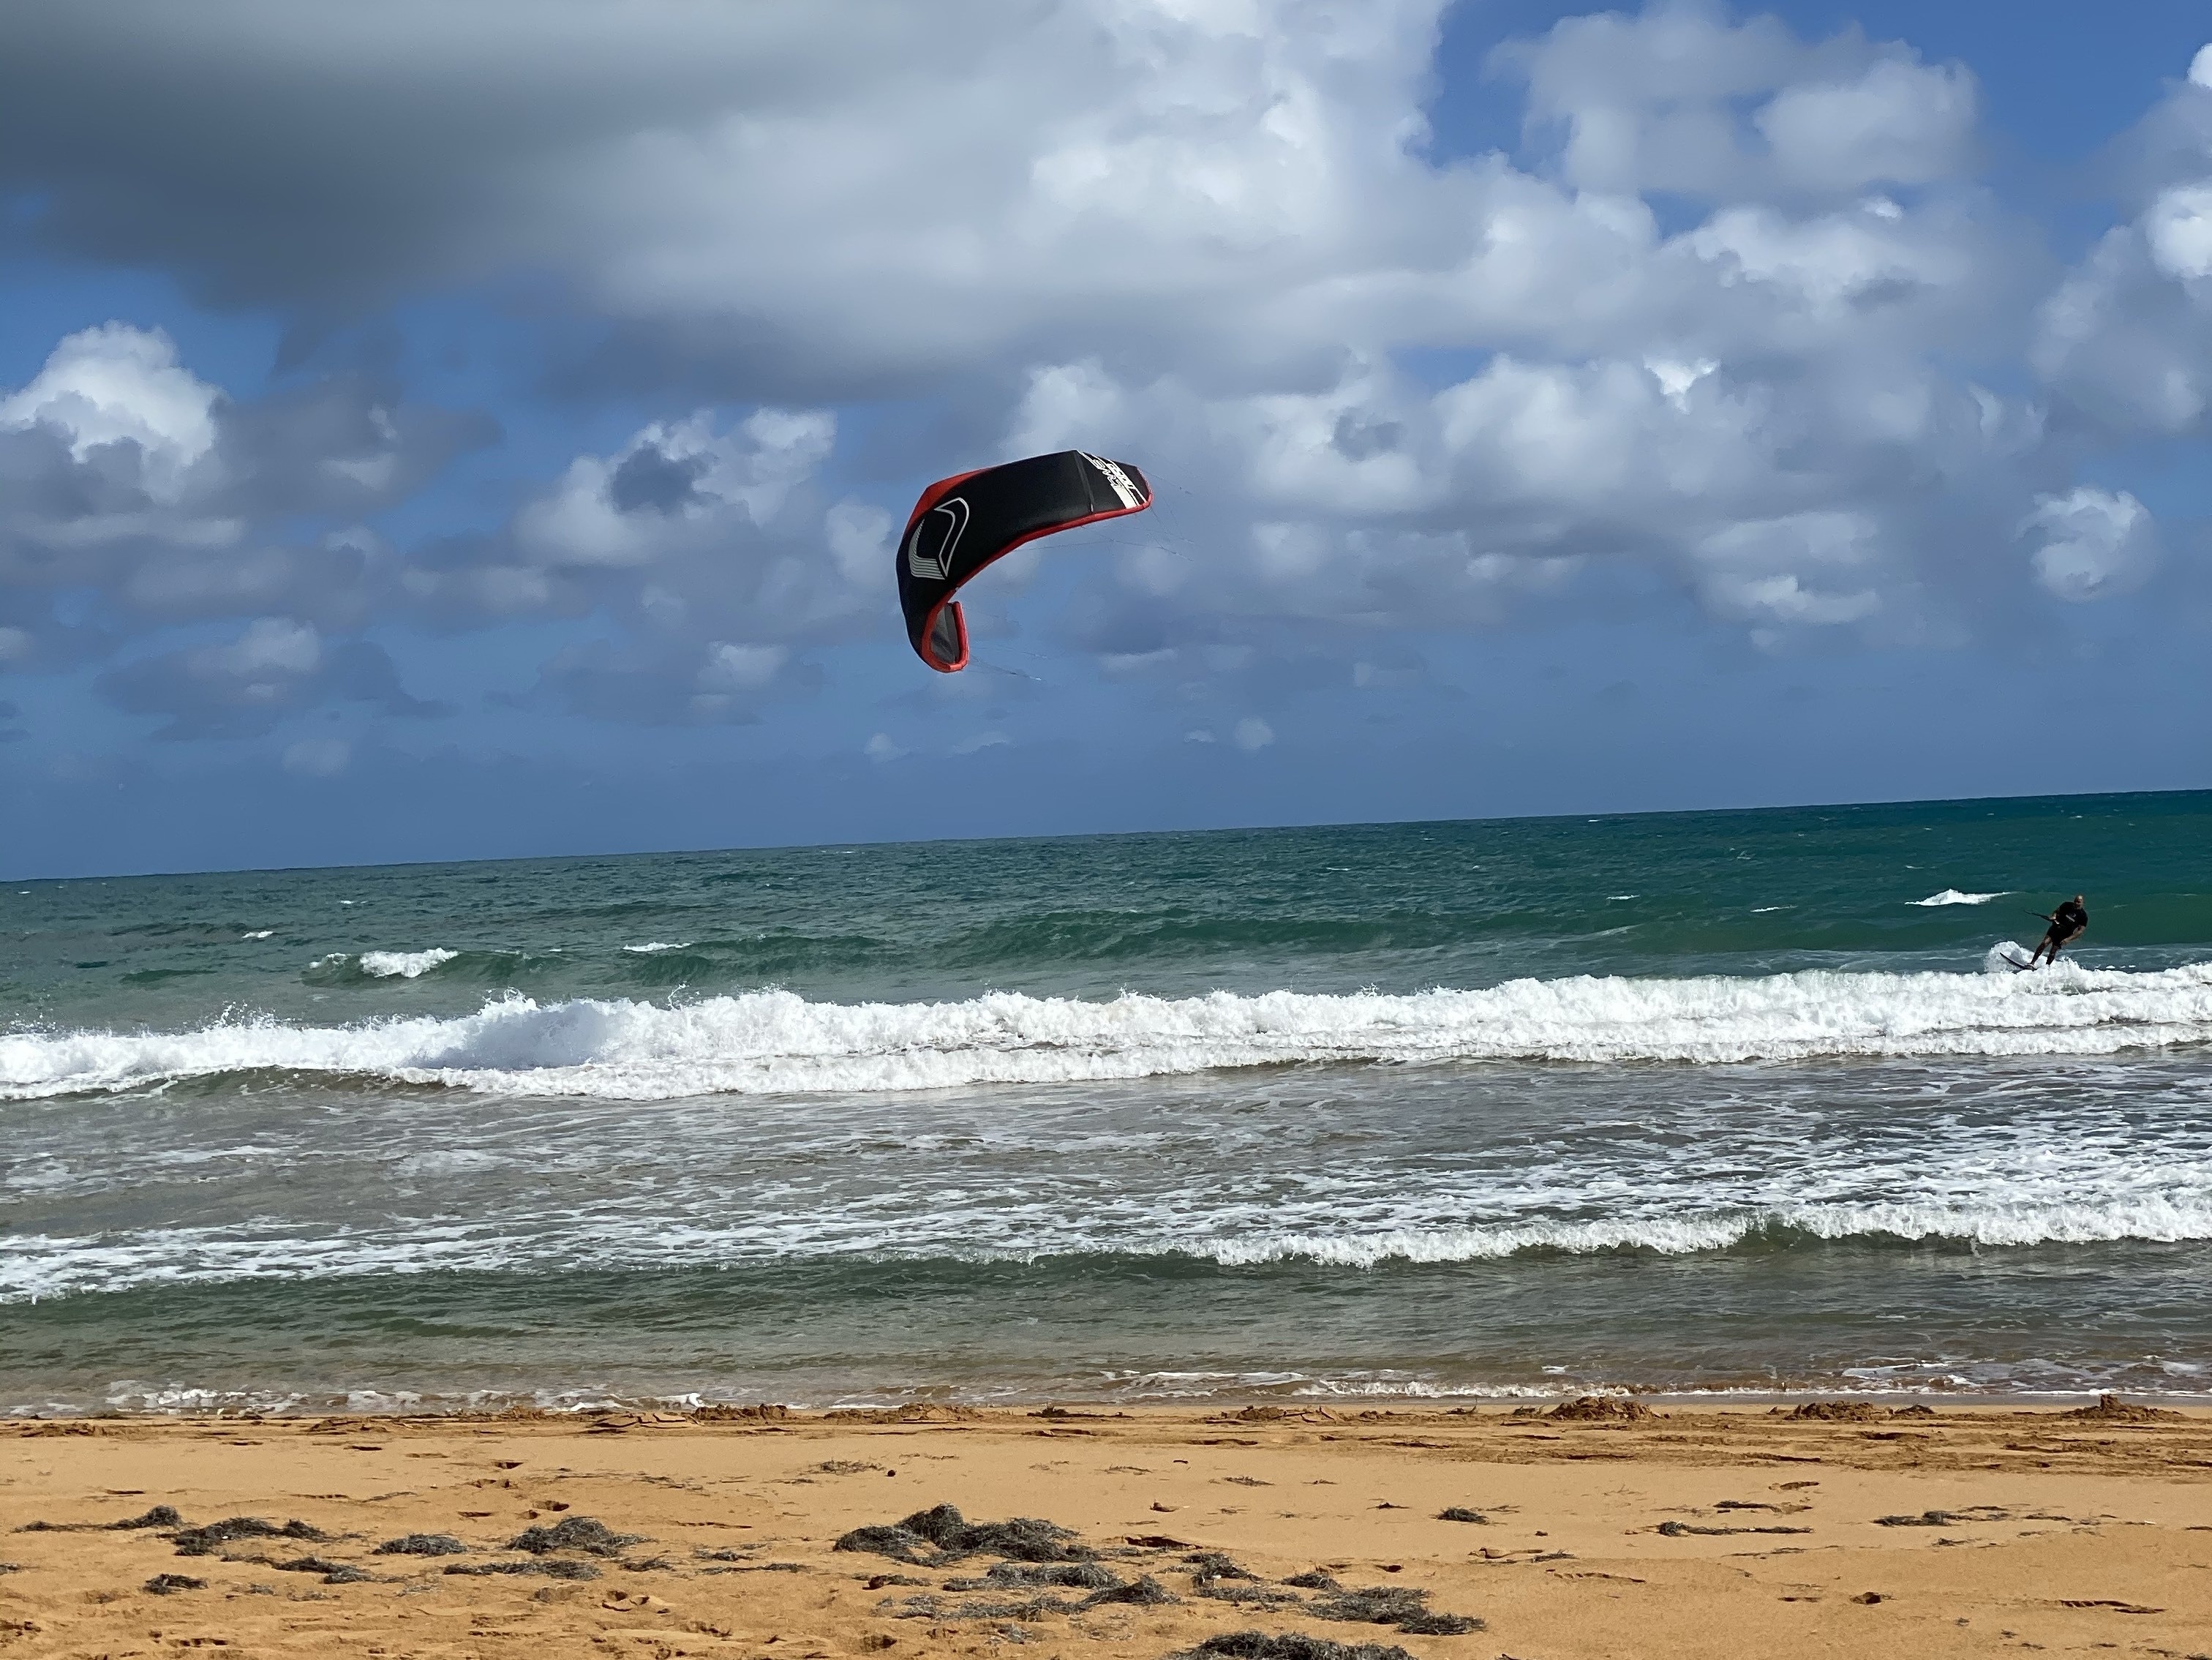 Kite Surfing is definitely an option, not my thing but fun to watch!